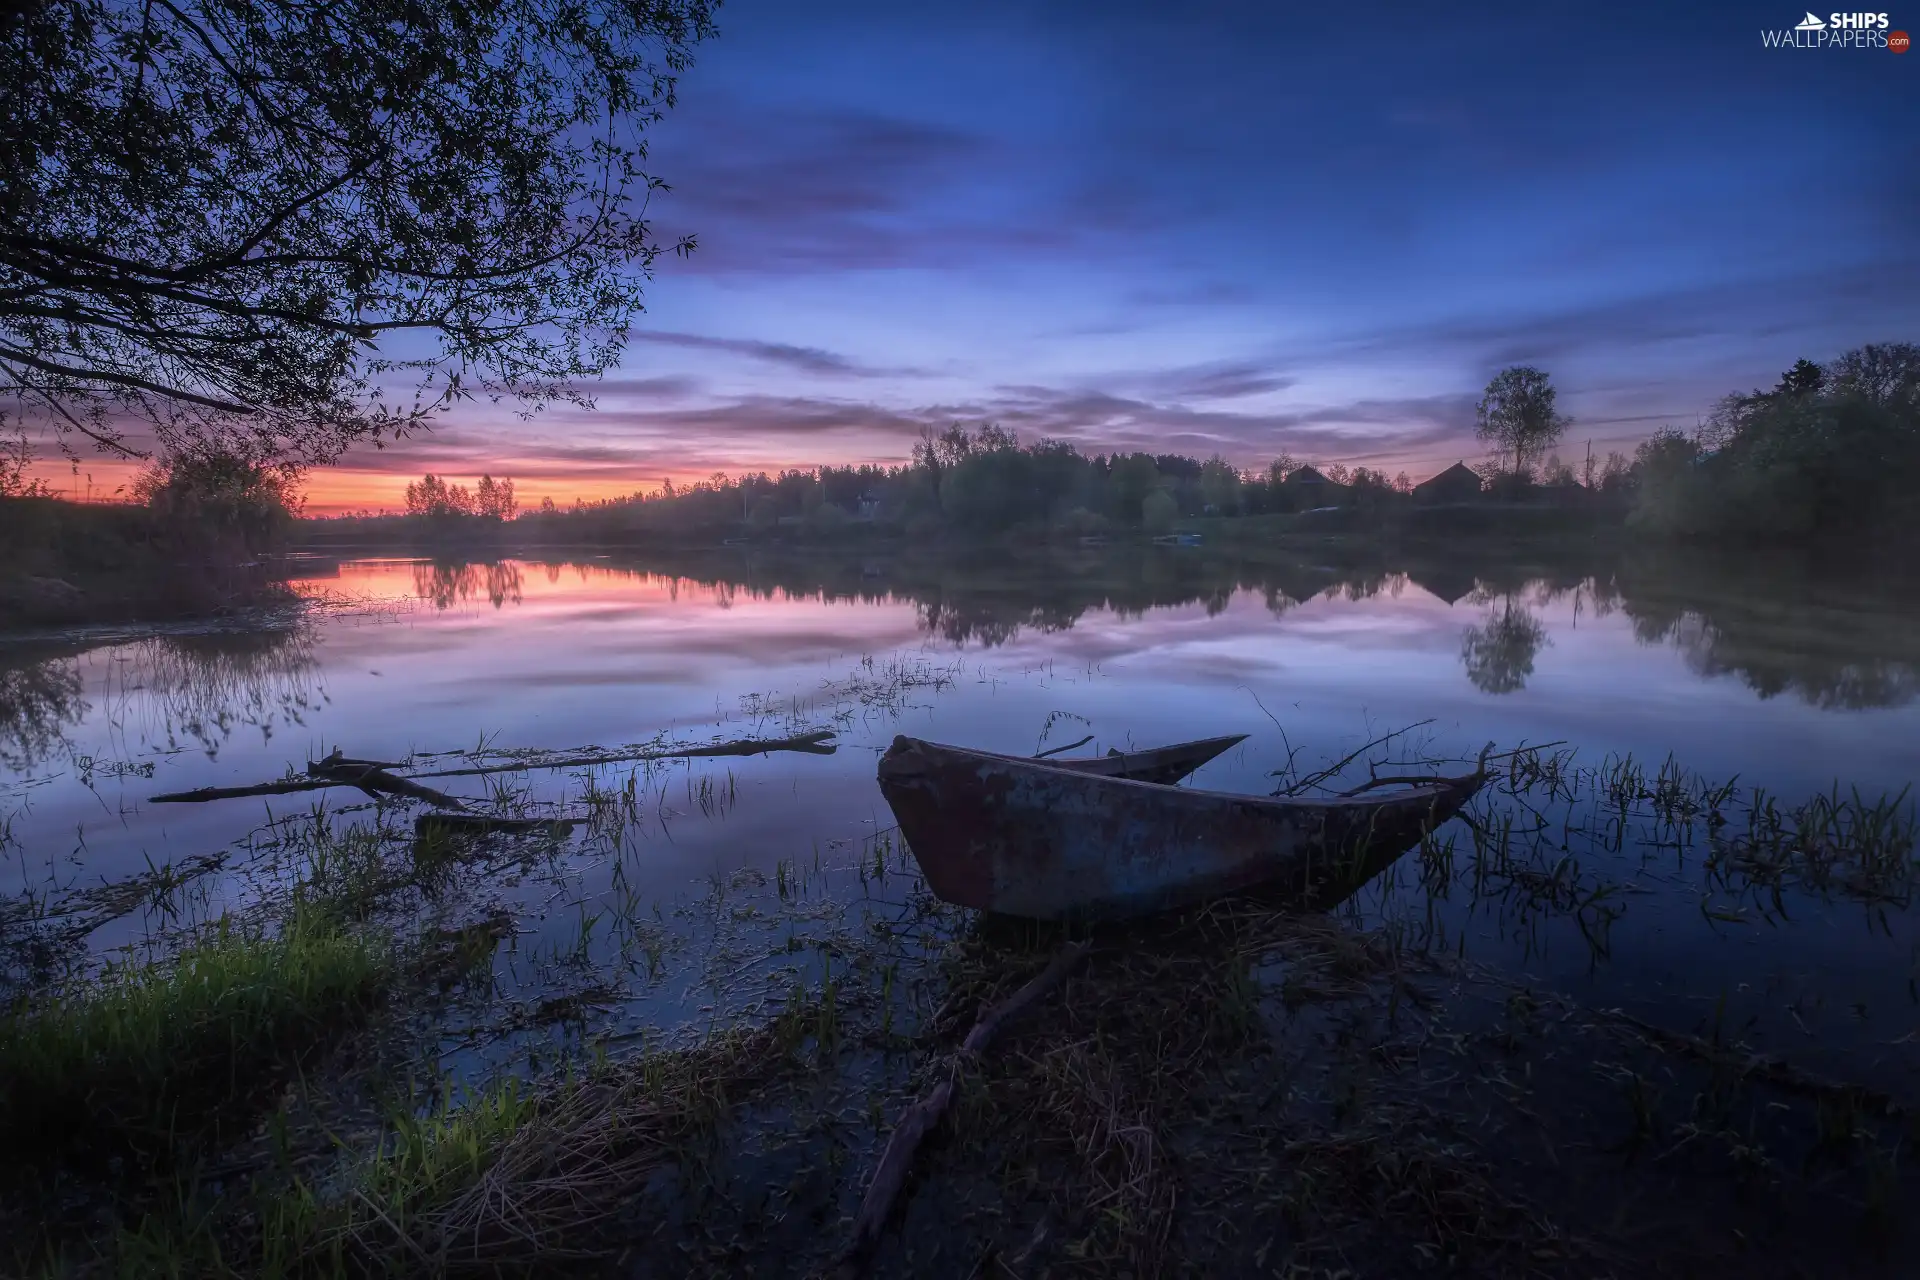 Boat, Dubna River, evening, Sky, Latgale, Latvia, trees, viewes, clouds